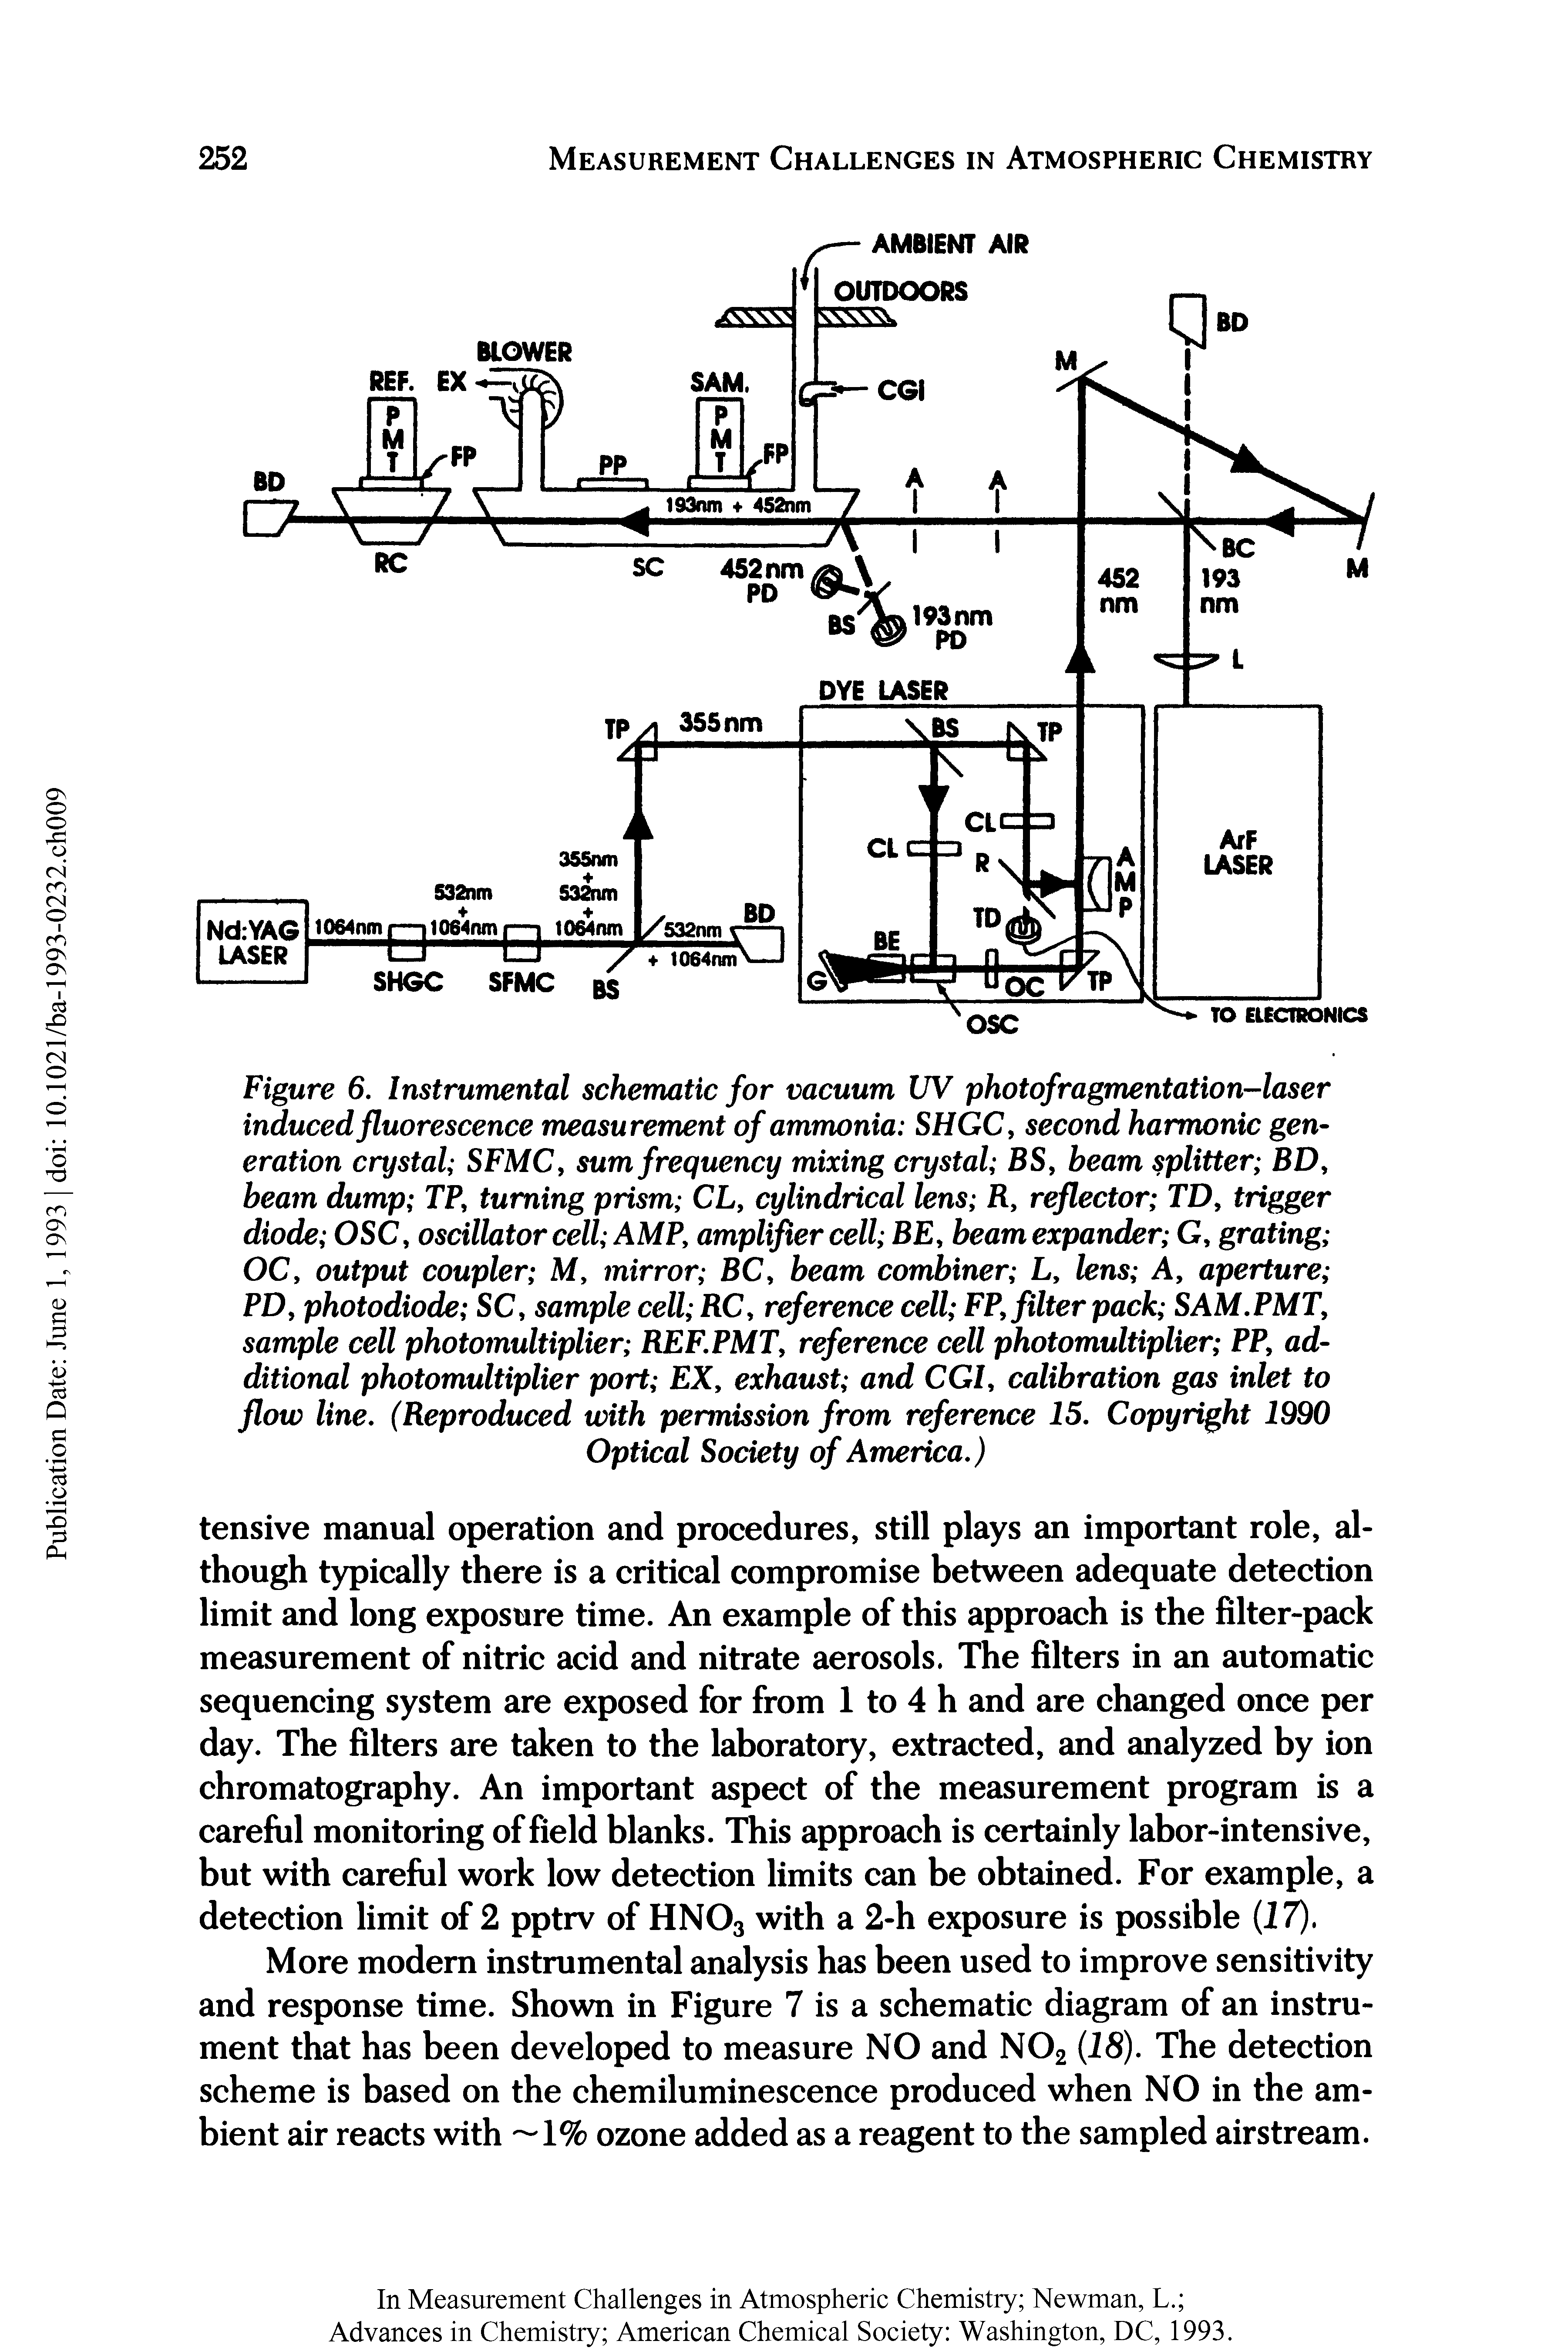 Figure 6. Instrumental schematic for vacuum UV photofragmentation-laser induced fluorescence measurement of ammonia SHGC, second harmonic generation crystal SFMC, sum frequency mixing crystal BS, beam splitter BD, beam dump TP, turning prism CL, cylindrical lens R, reflector TD, trigger diode OSC, oscillator cell AMP, amplifier cell BE, beam expander G, grating OC, output coupler M, mirror BC, beam combiner L, lens A, aperture PD, photodiode SC, sample cell RC, reference cell FP, filter pack SAM.PMT, sample cell photomultiplier REF.PMT, reference cell photomultiplier PP, additional photomultiplier port EX, exhaust and CGI, calibration gas inlet to flow line. (Reproduced with permission from reference 15. Copyright 1990 Optical Society of America.)...